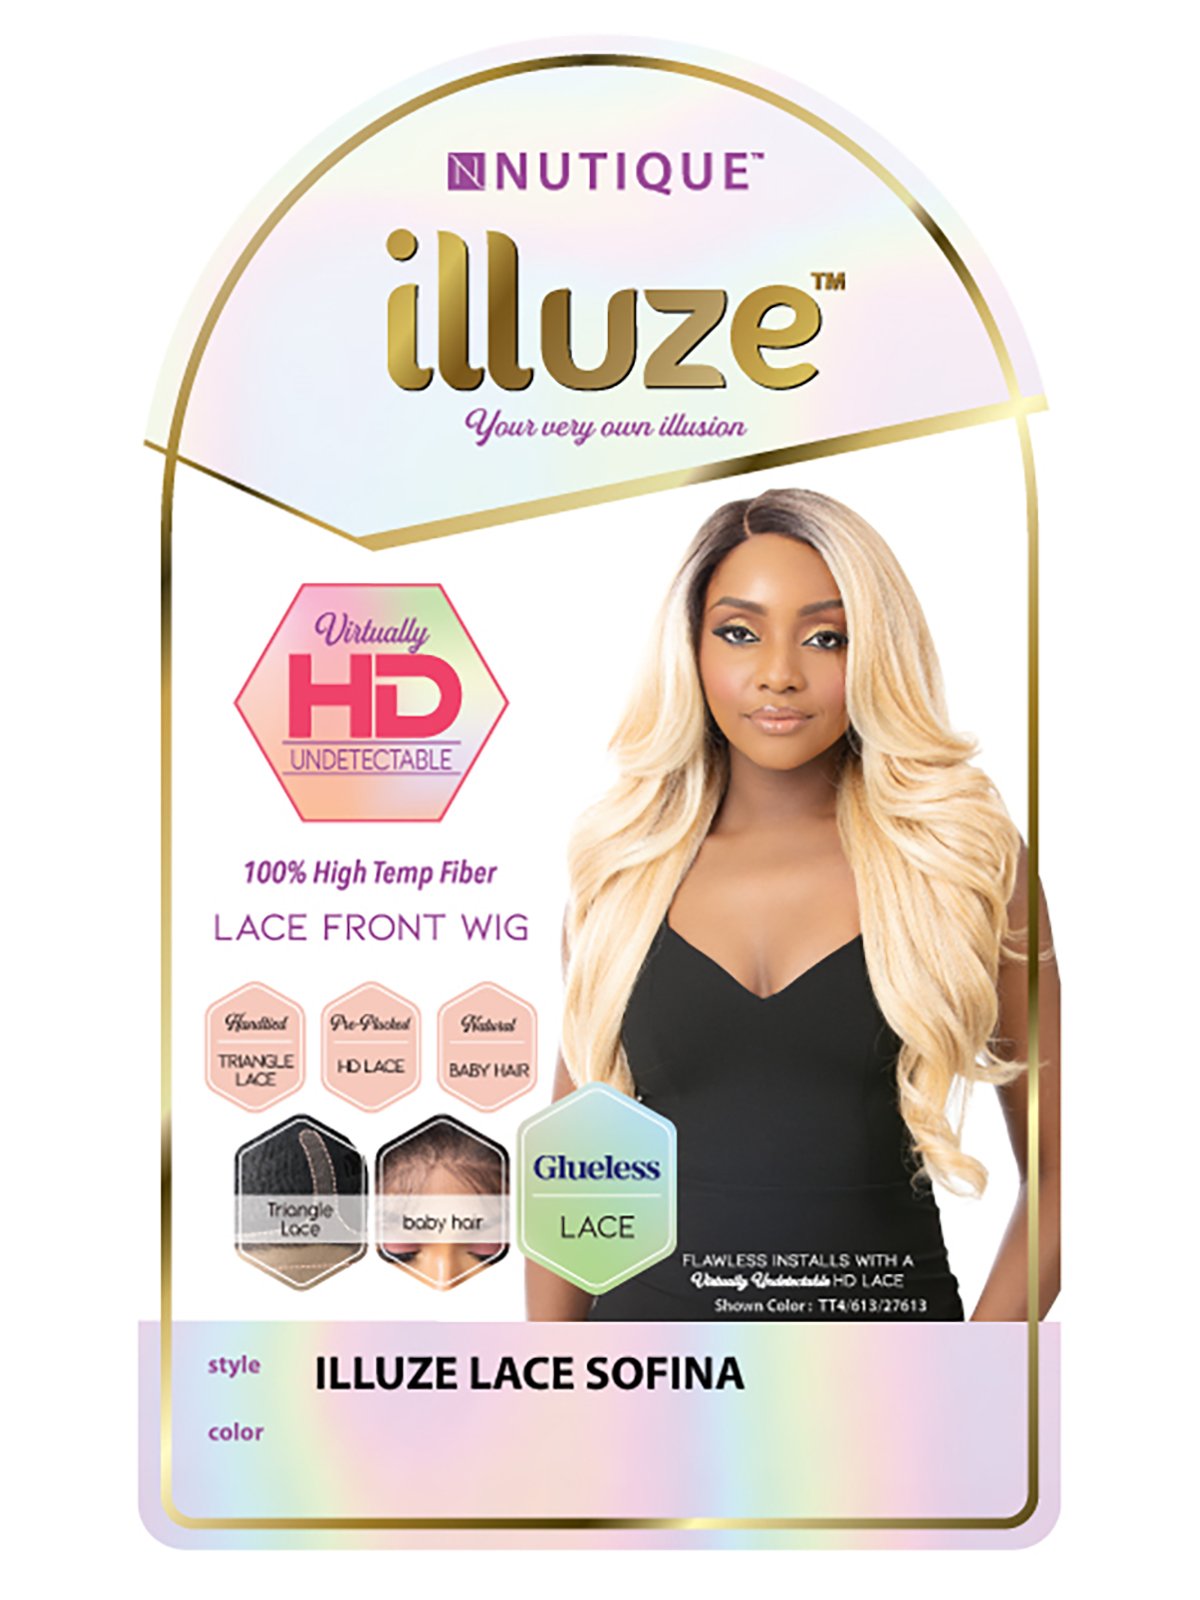 It's a Wig - Nutique Illuze HD lace Front Wig Synthetic Hair SOFINA